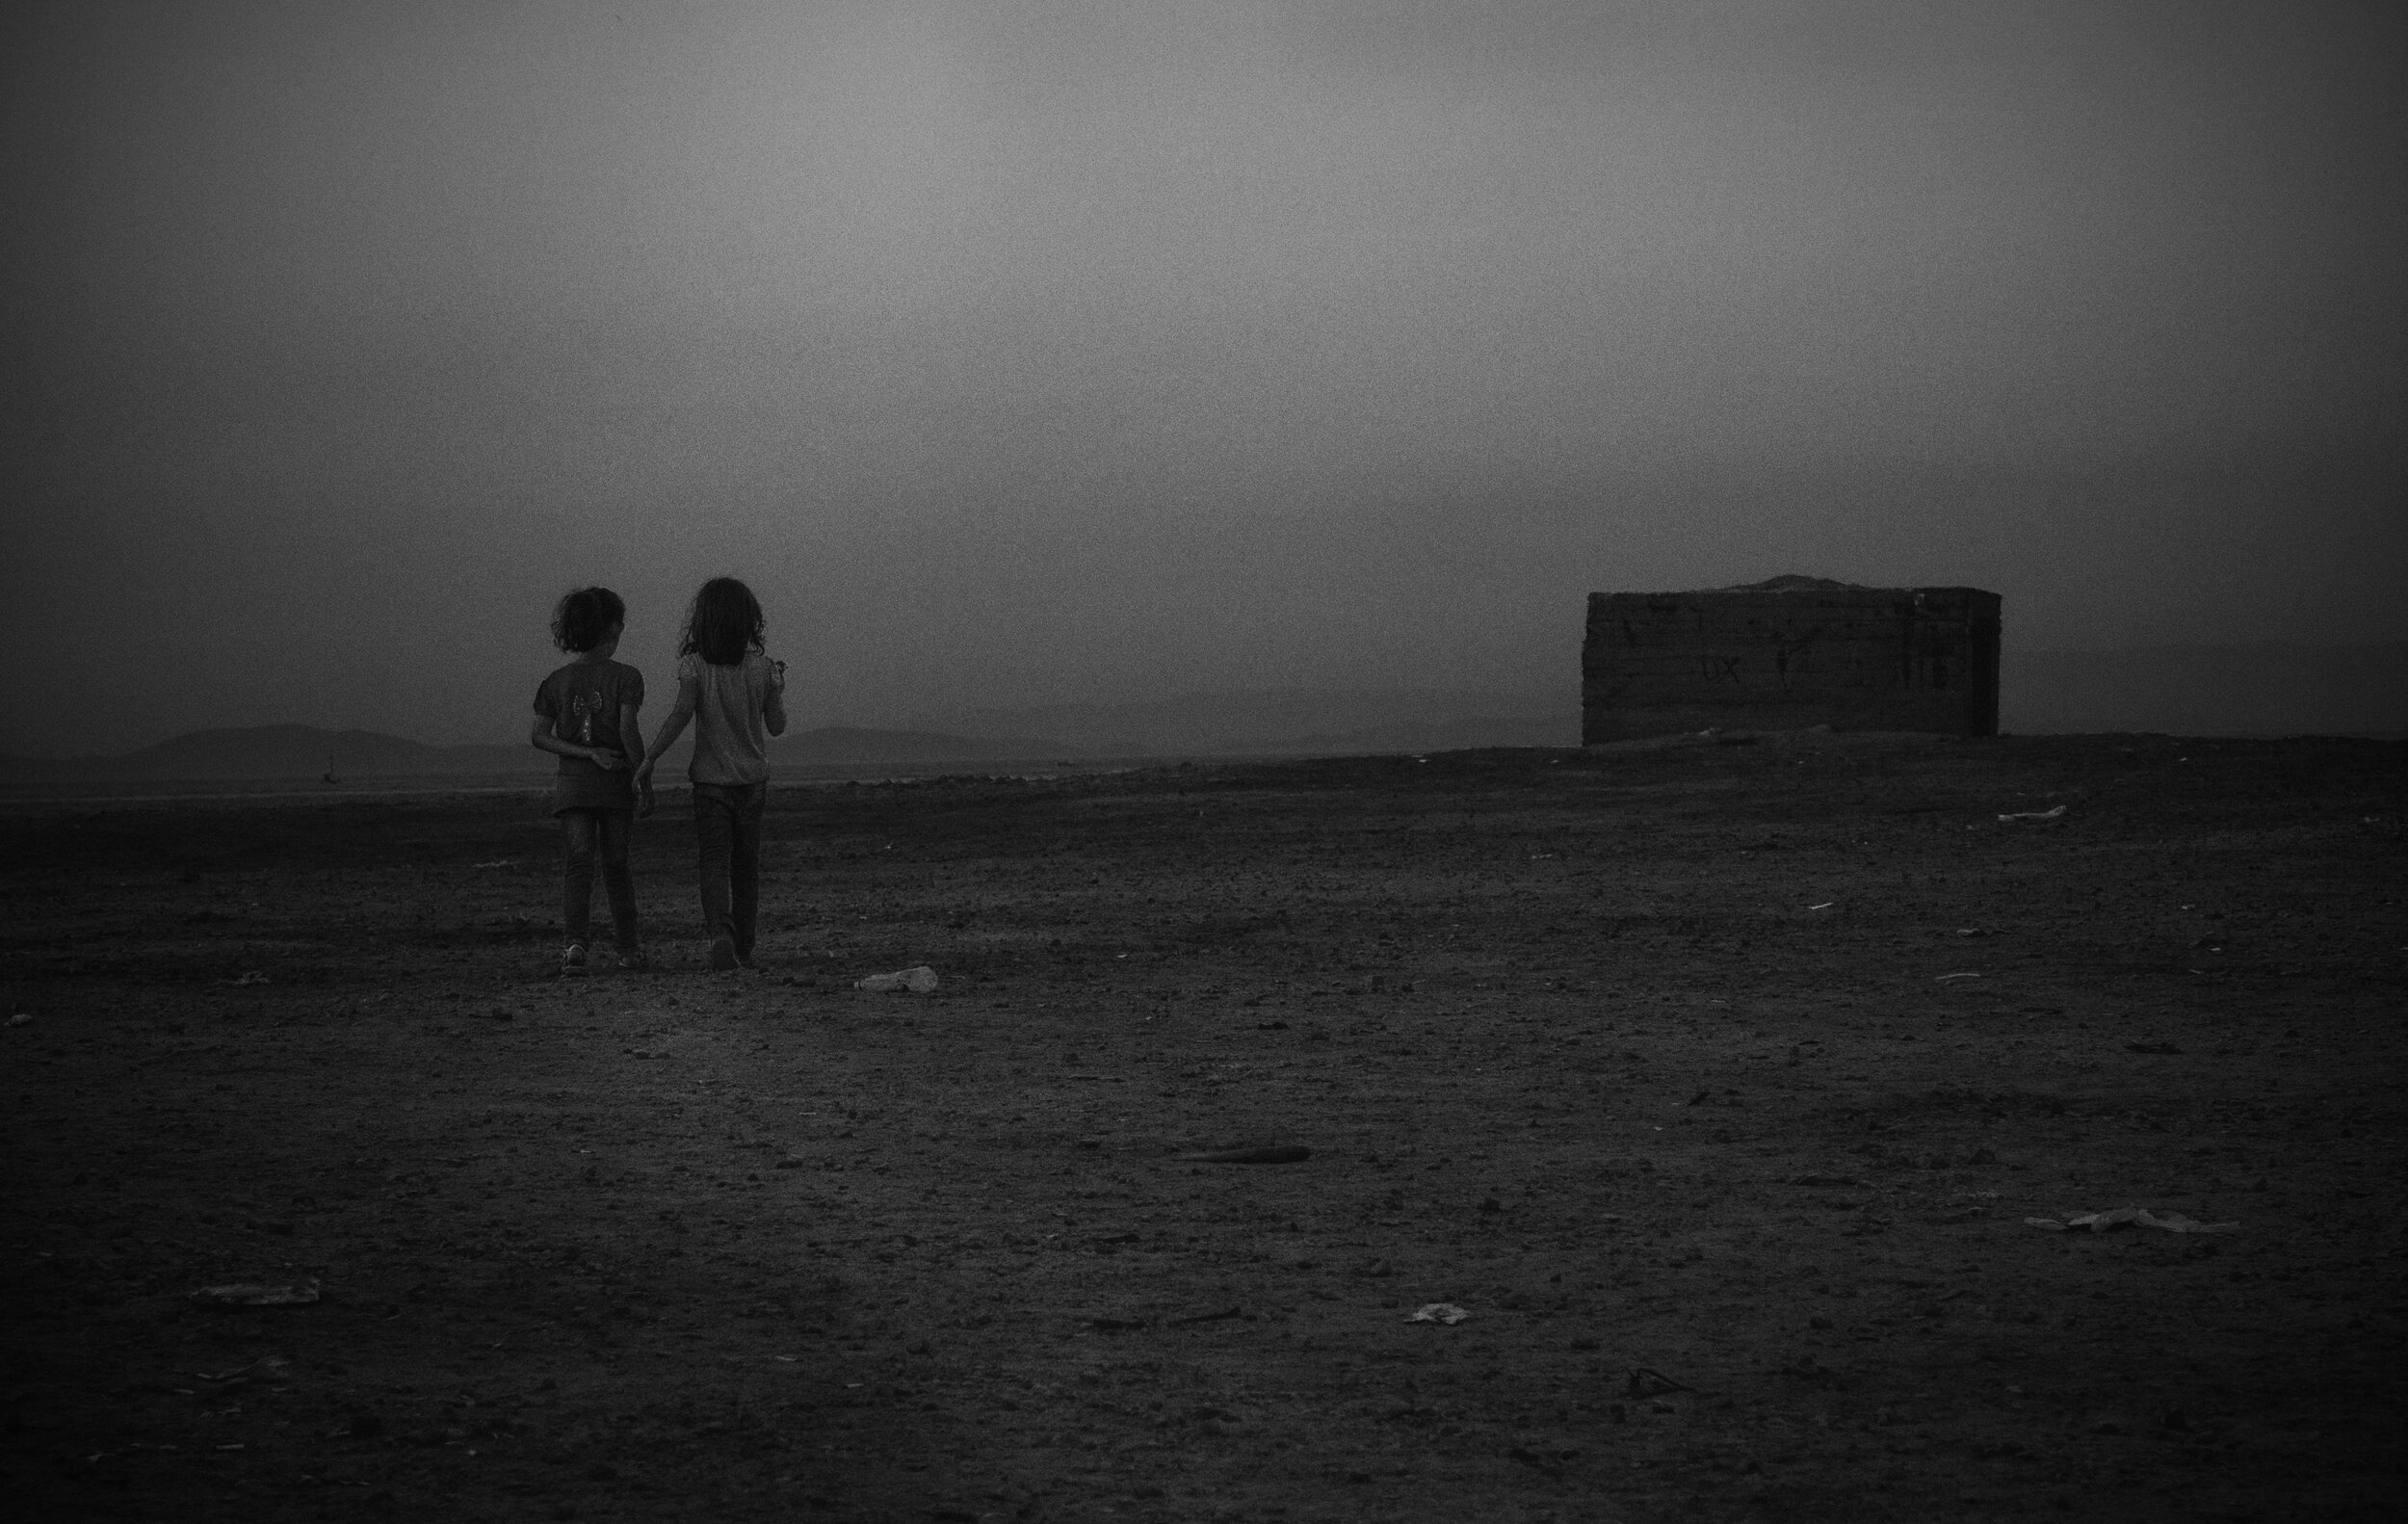 Lene Marie Fossen - Refugee Children Chios 2015 - Archival pigment print - Size 50 x 79,01 - Edition of 7 + 2 AP - Next available is #3/7 Courtesy WILLAS contemporary